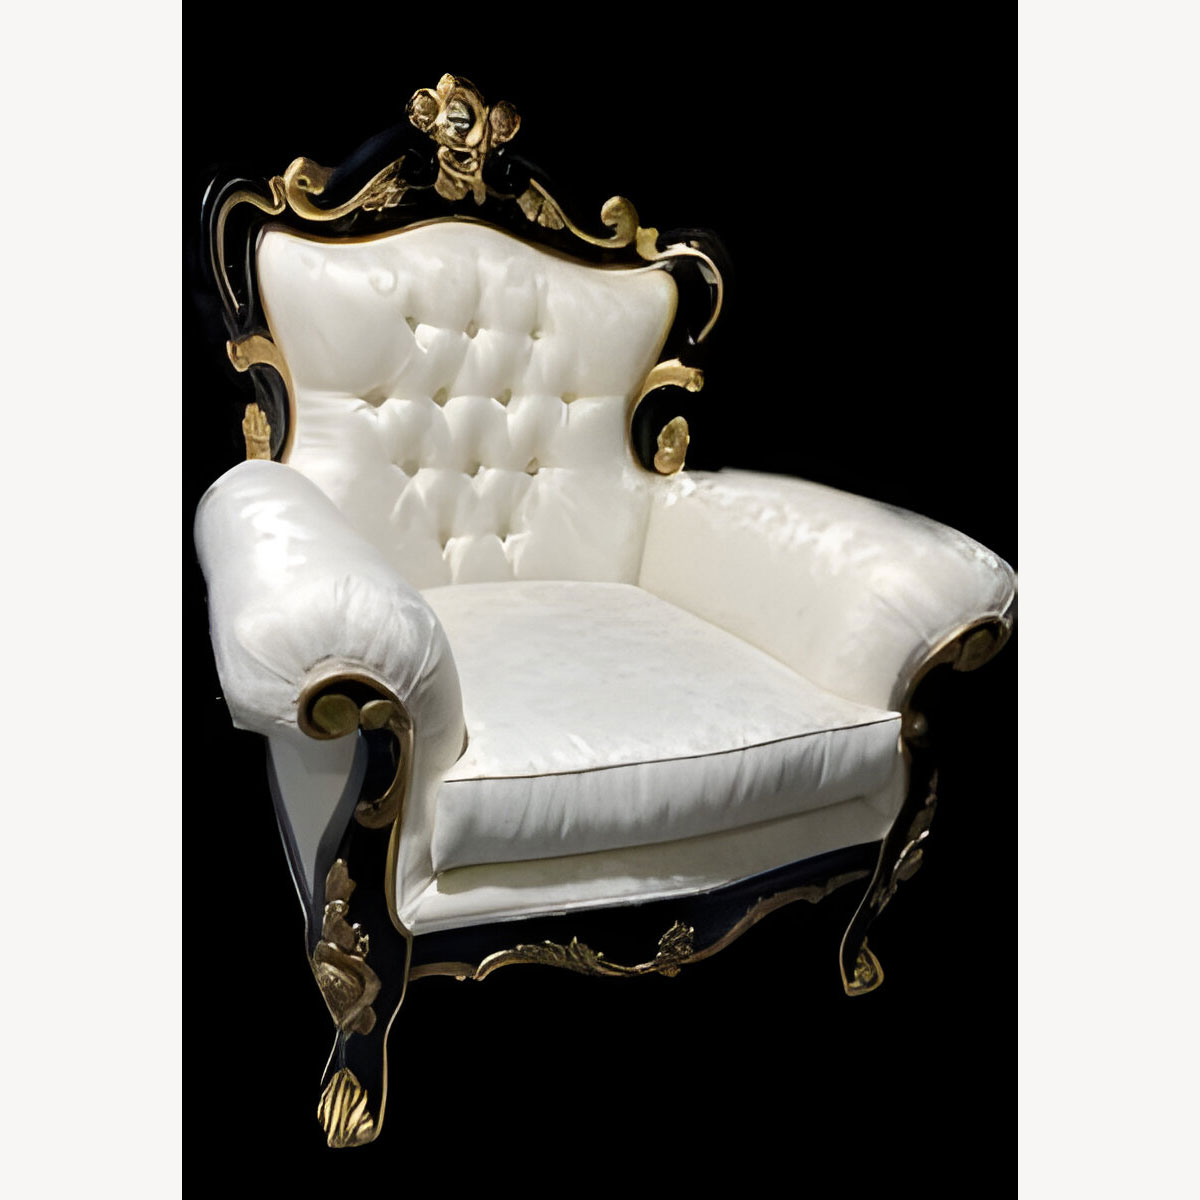 Antiqued Gold Leaf Louis Huge Arm Chair Black With Gold Shop Home Diva Shown In An Ivory Cream Damask Type Fabric 6 - Hampshire Barn Interiors - Antiqued Gold Leaf Louis Huge Arm Chair Black With Gold Shop Home Diva Shown In An Ivory Cream Damask Type Fabric -